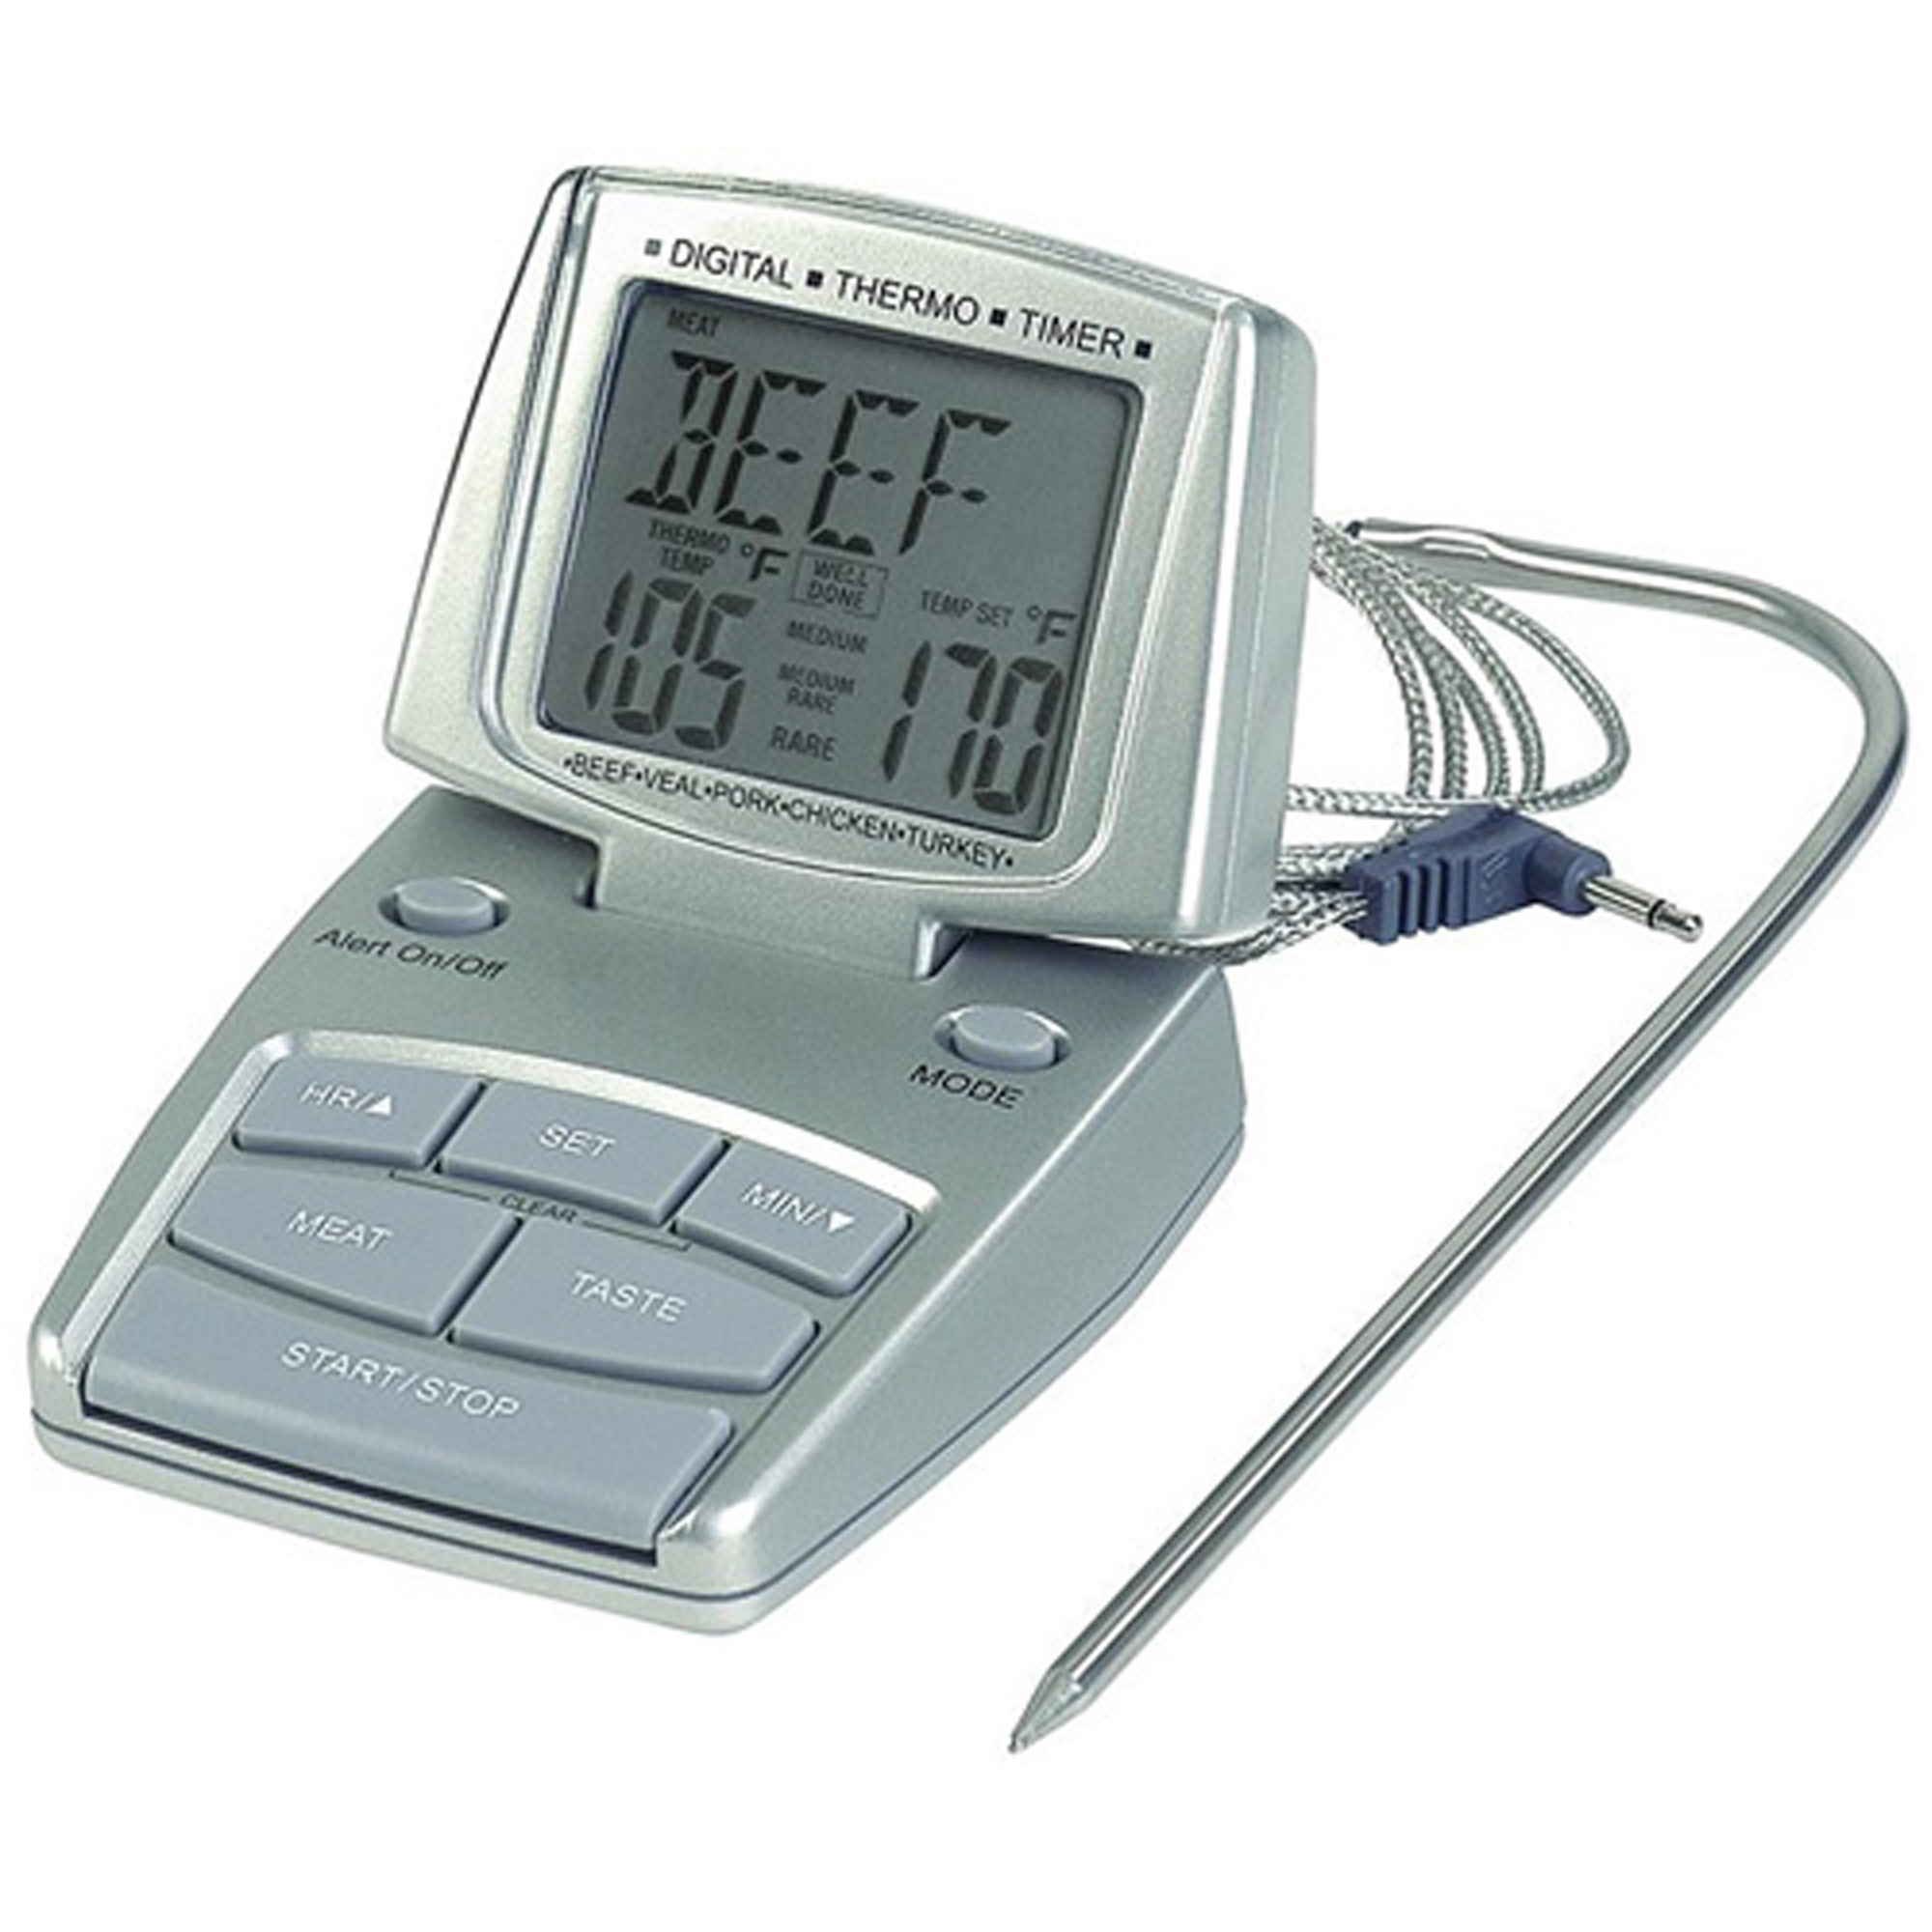 Bios Pre-Programmed Cooking Thermometer and Timer Gray